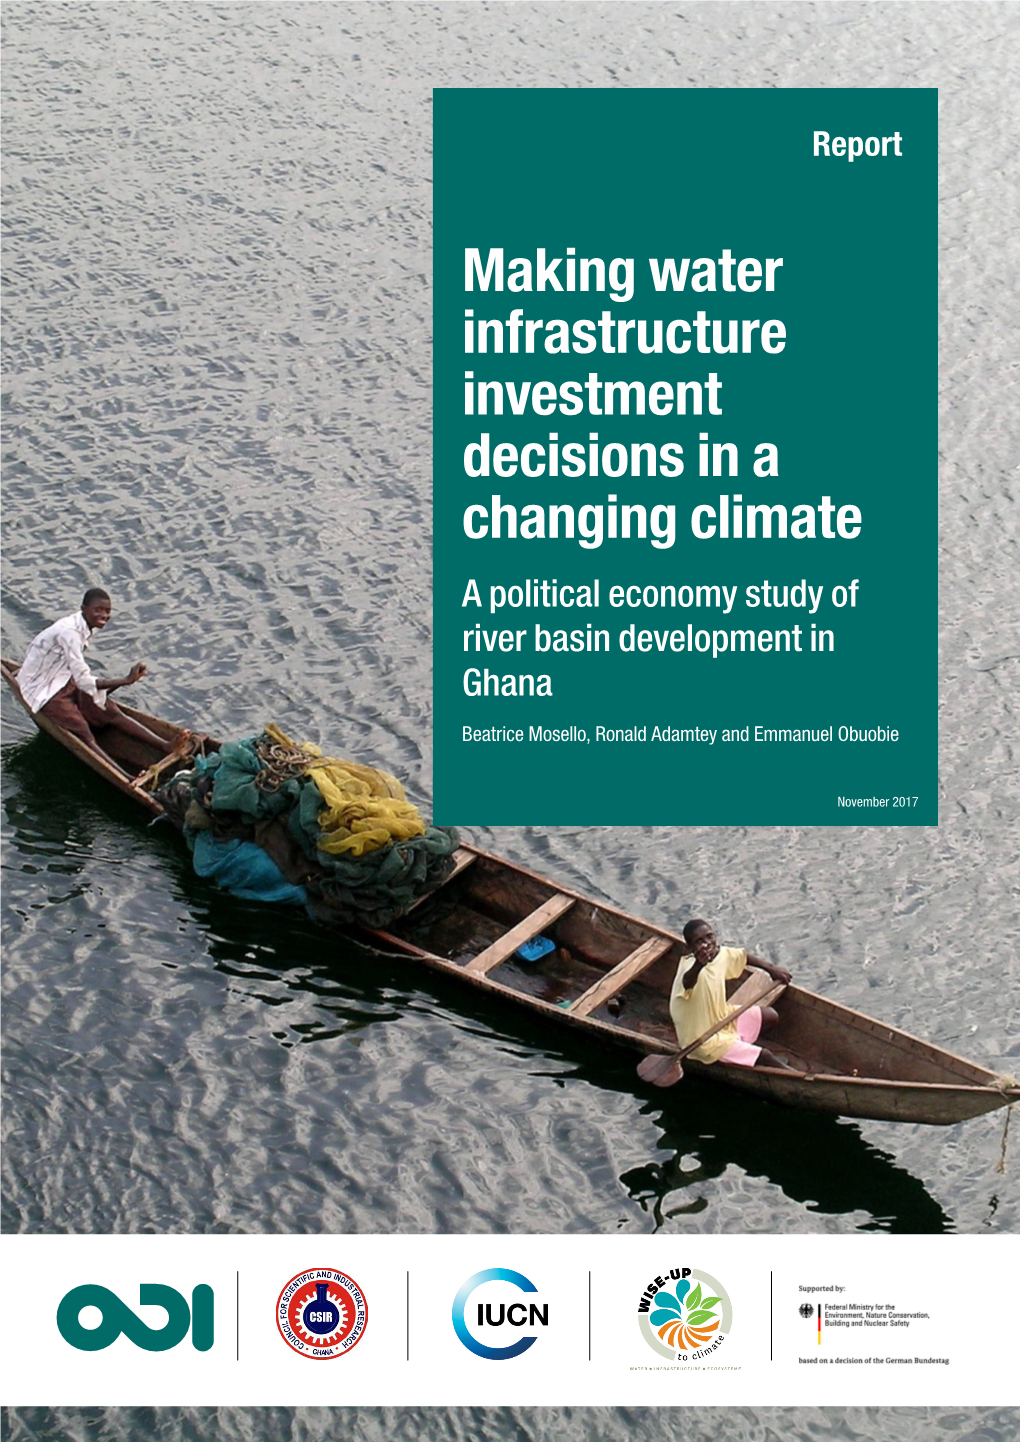 Making Water Infrastructure Investment Decisions in a Changing Climate a Political Economy Study of River Basin Development in Ghana